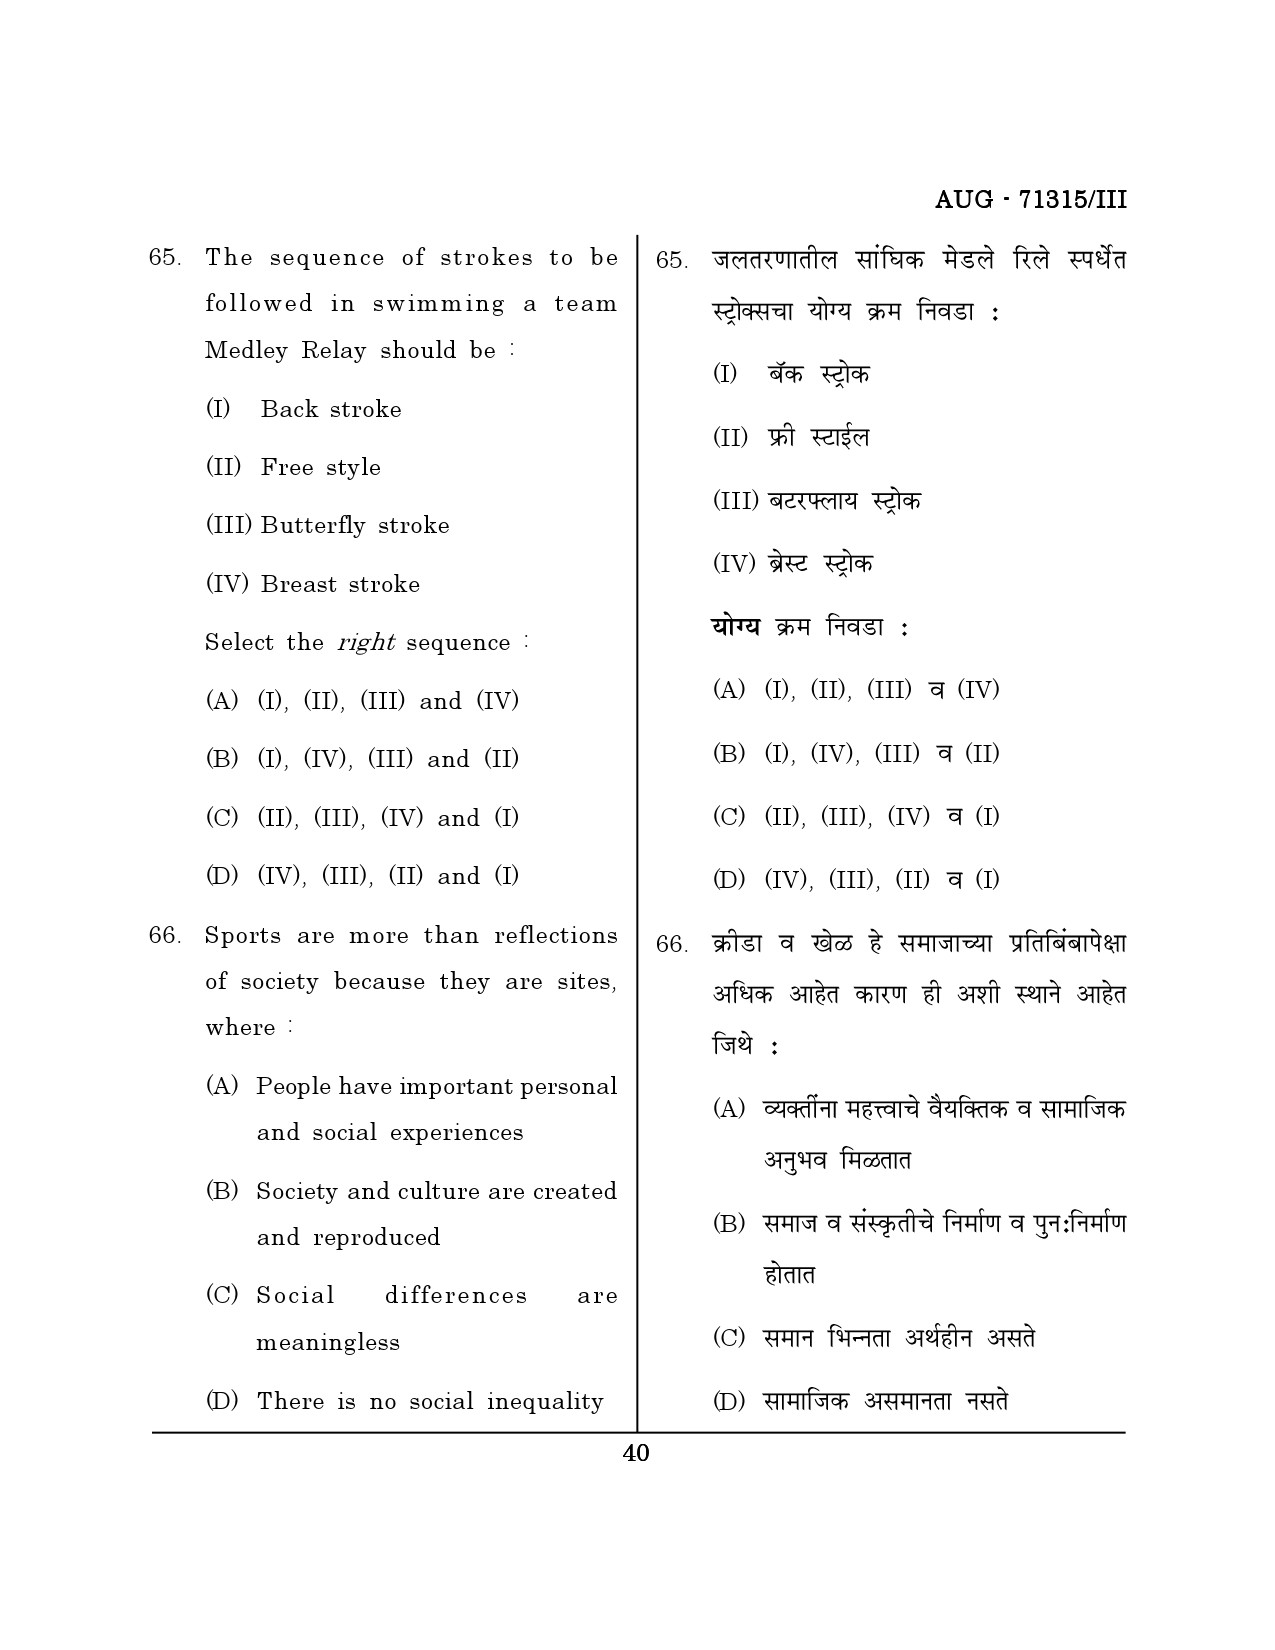 Maharashtra SET Physical Education Question Paper III August 2015 39